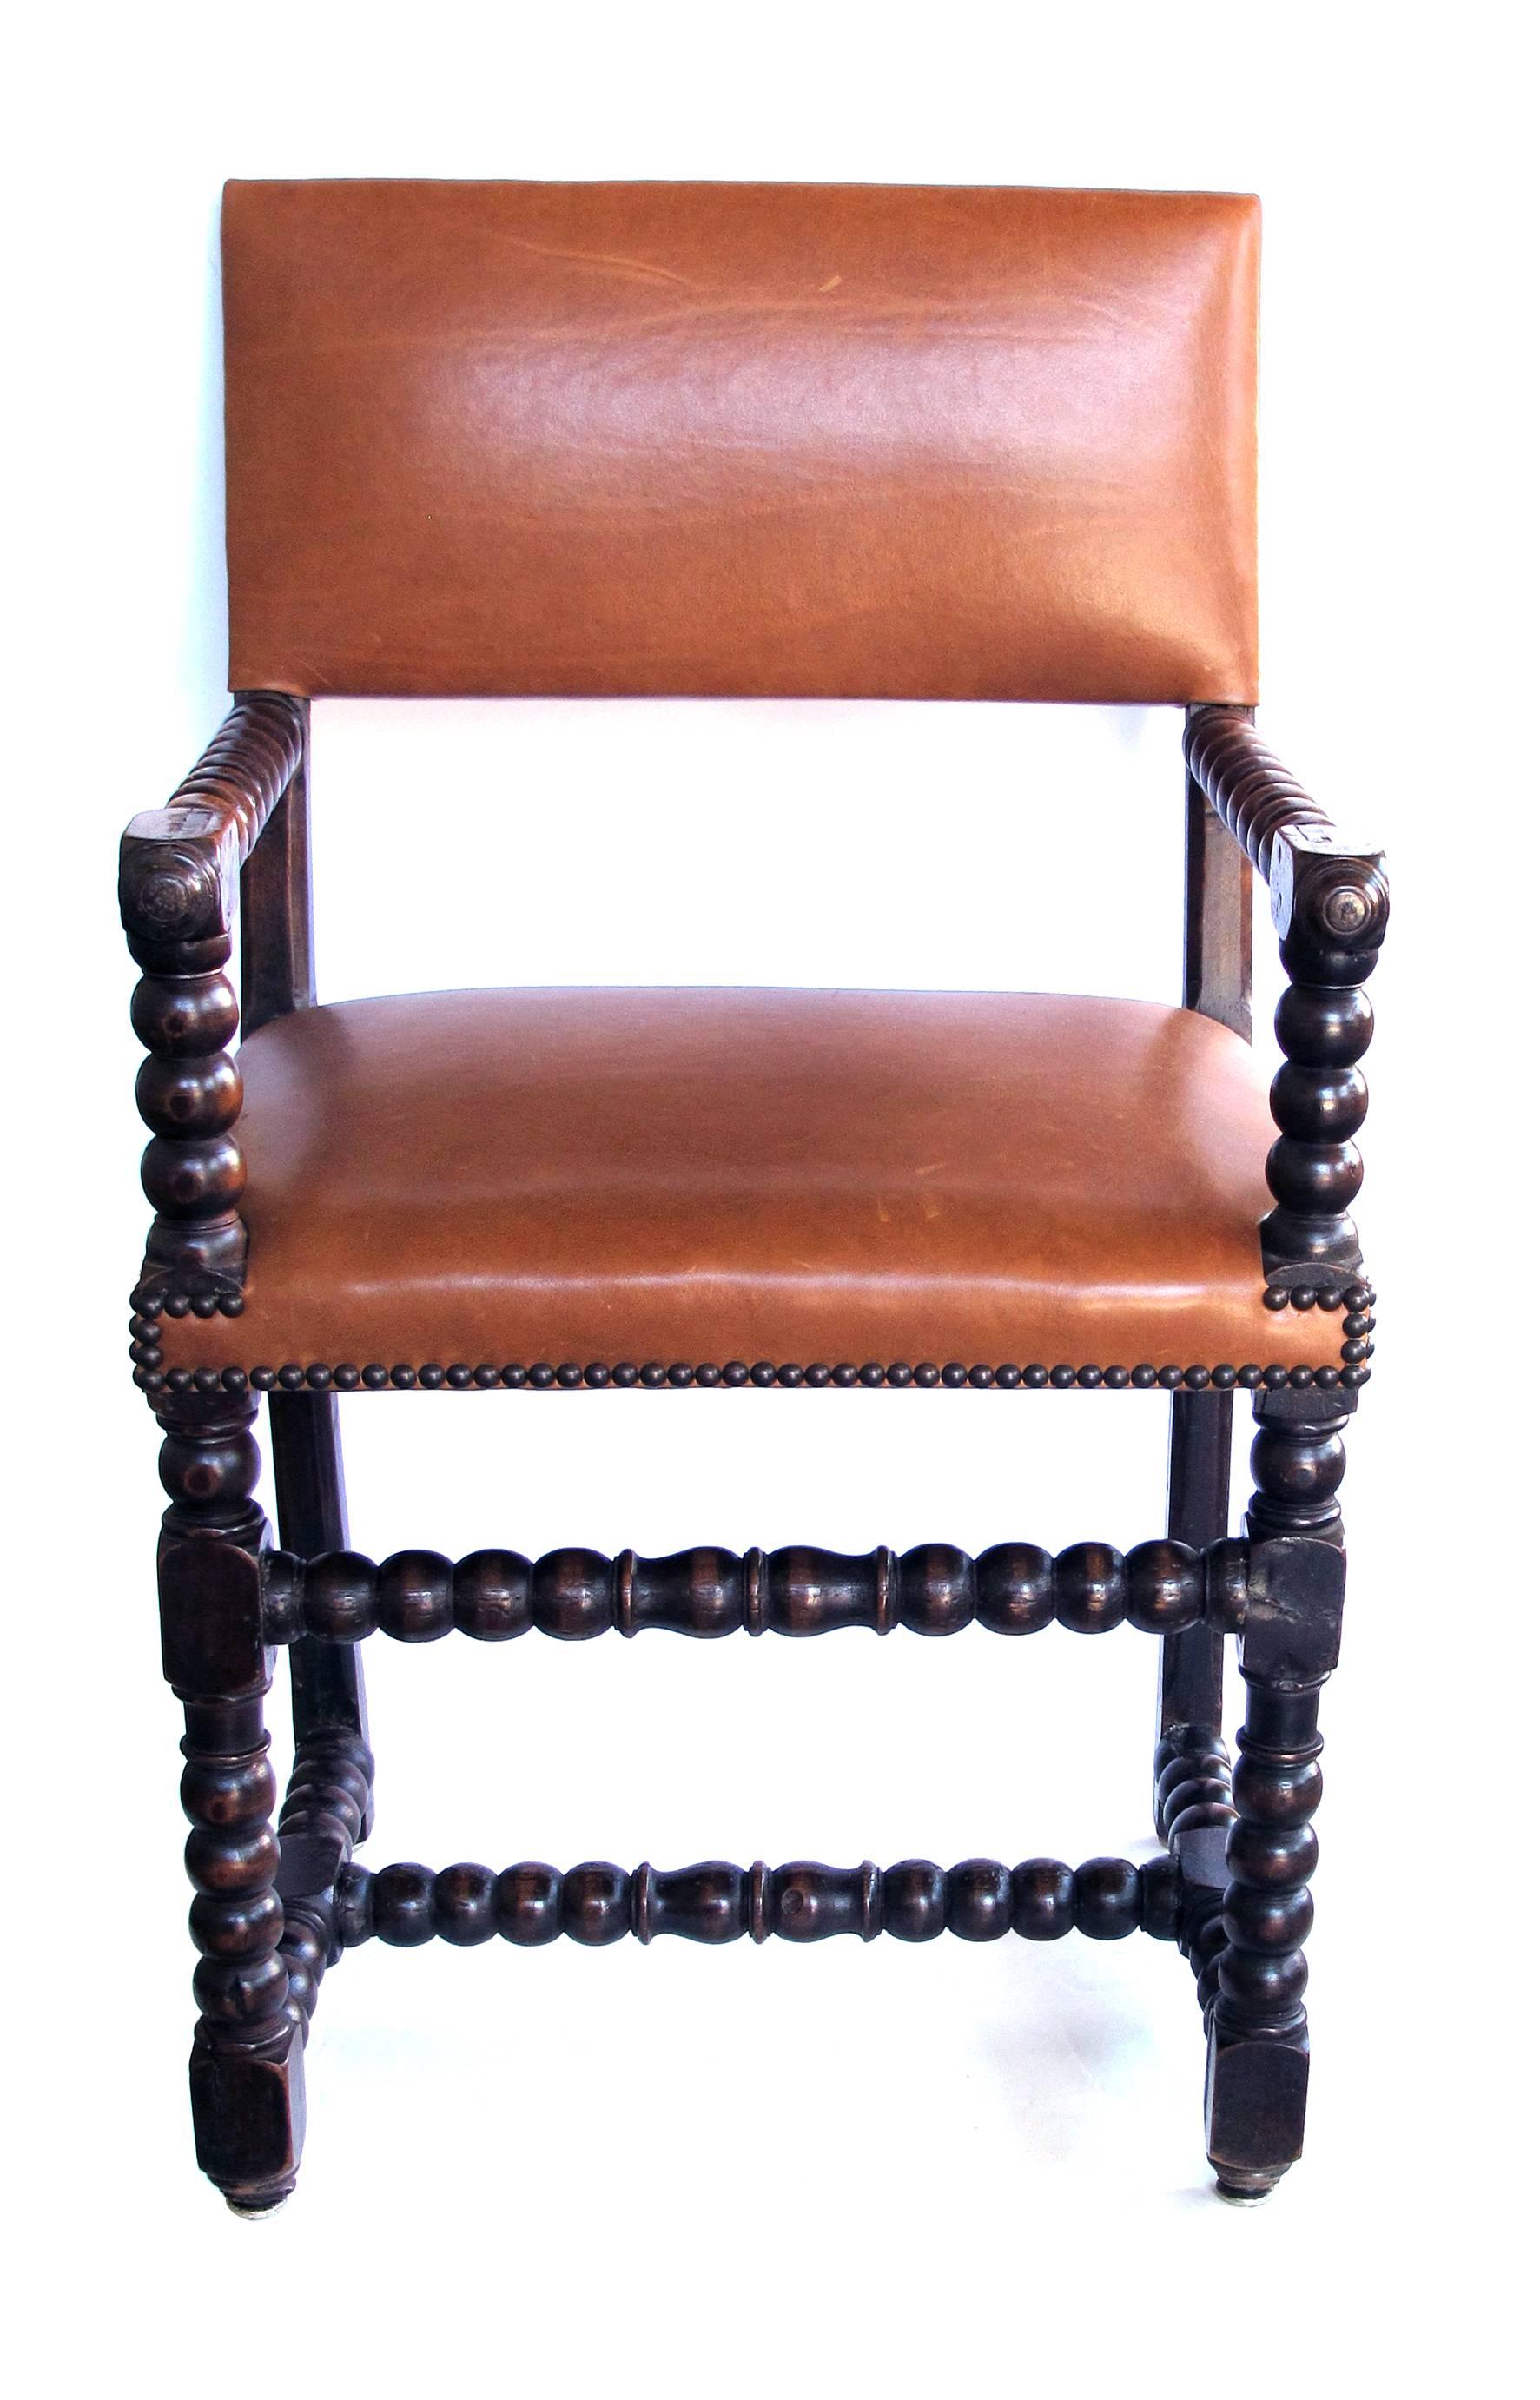 A handsome English Baroque style carved walnut bobbin chair with leather upholstery.